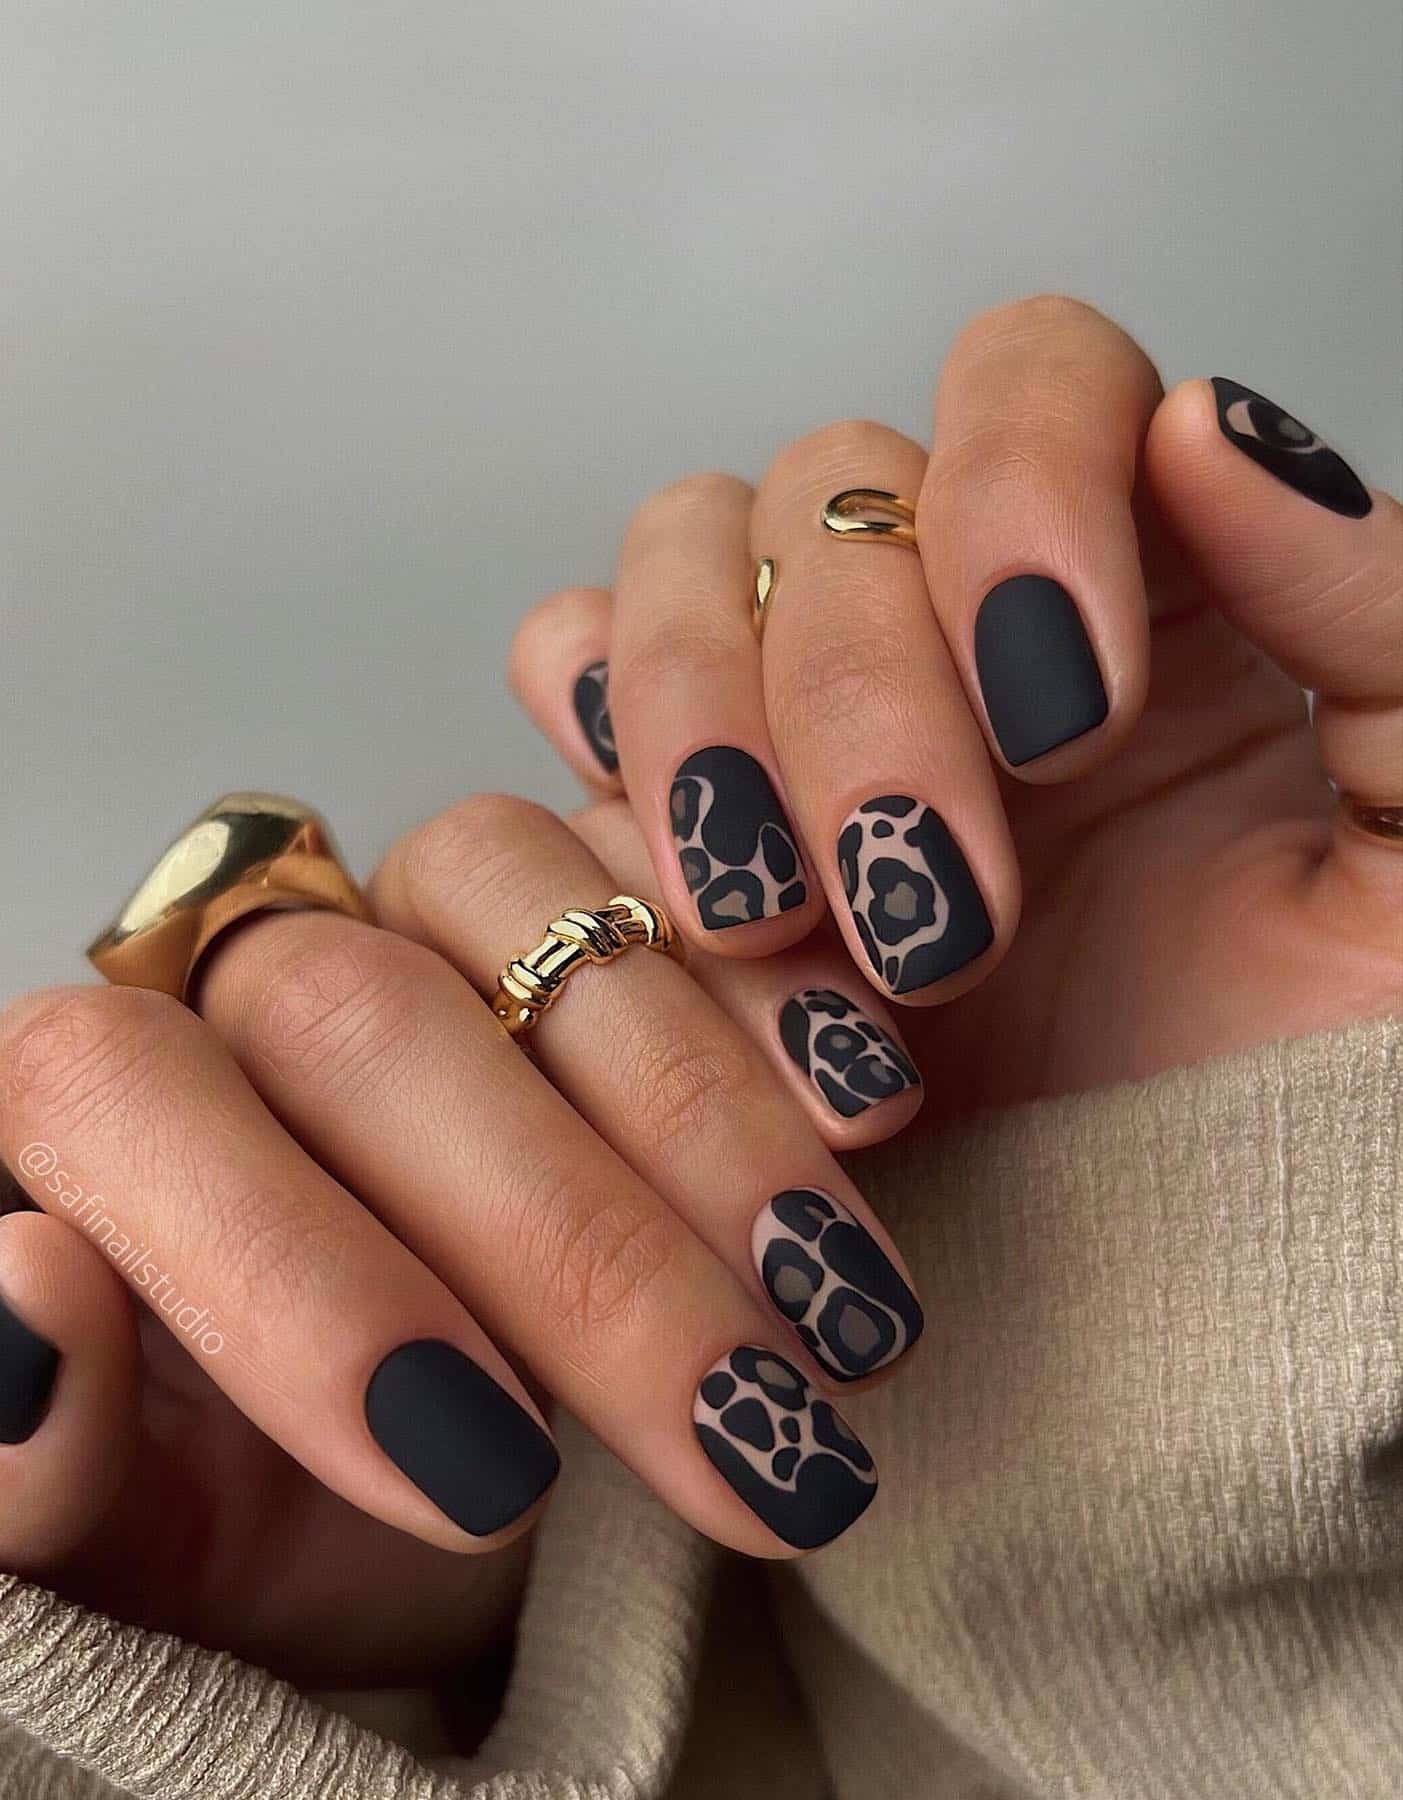 Short matte black nails with nude and black animal print accent nails